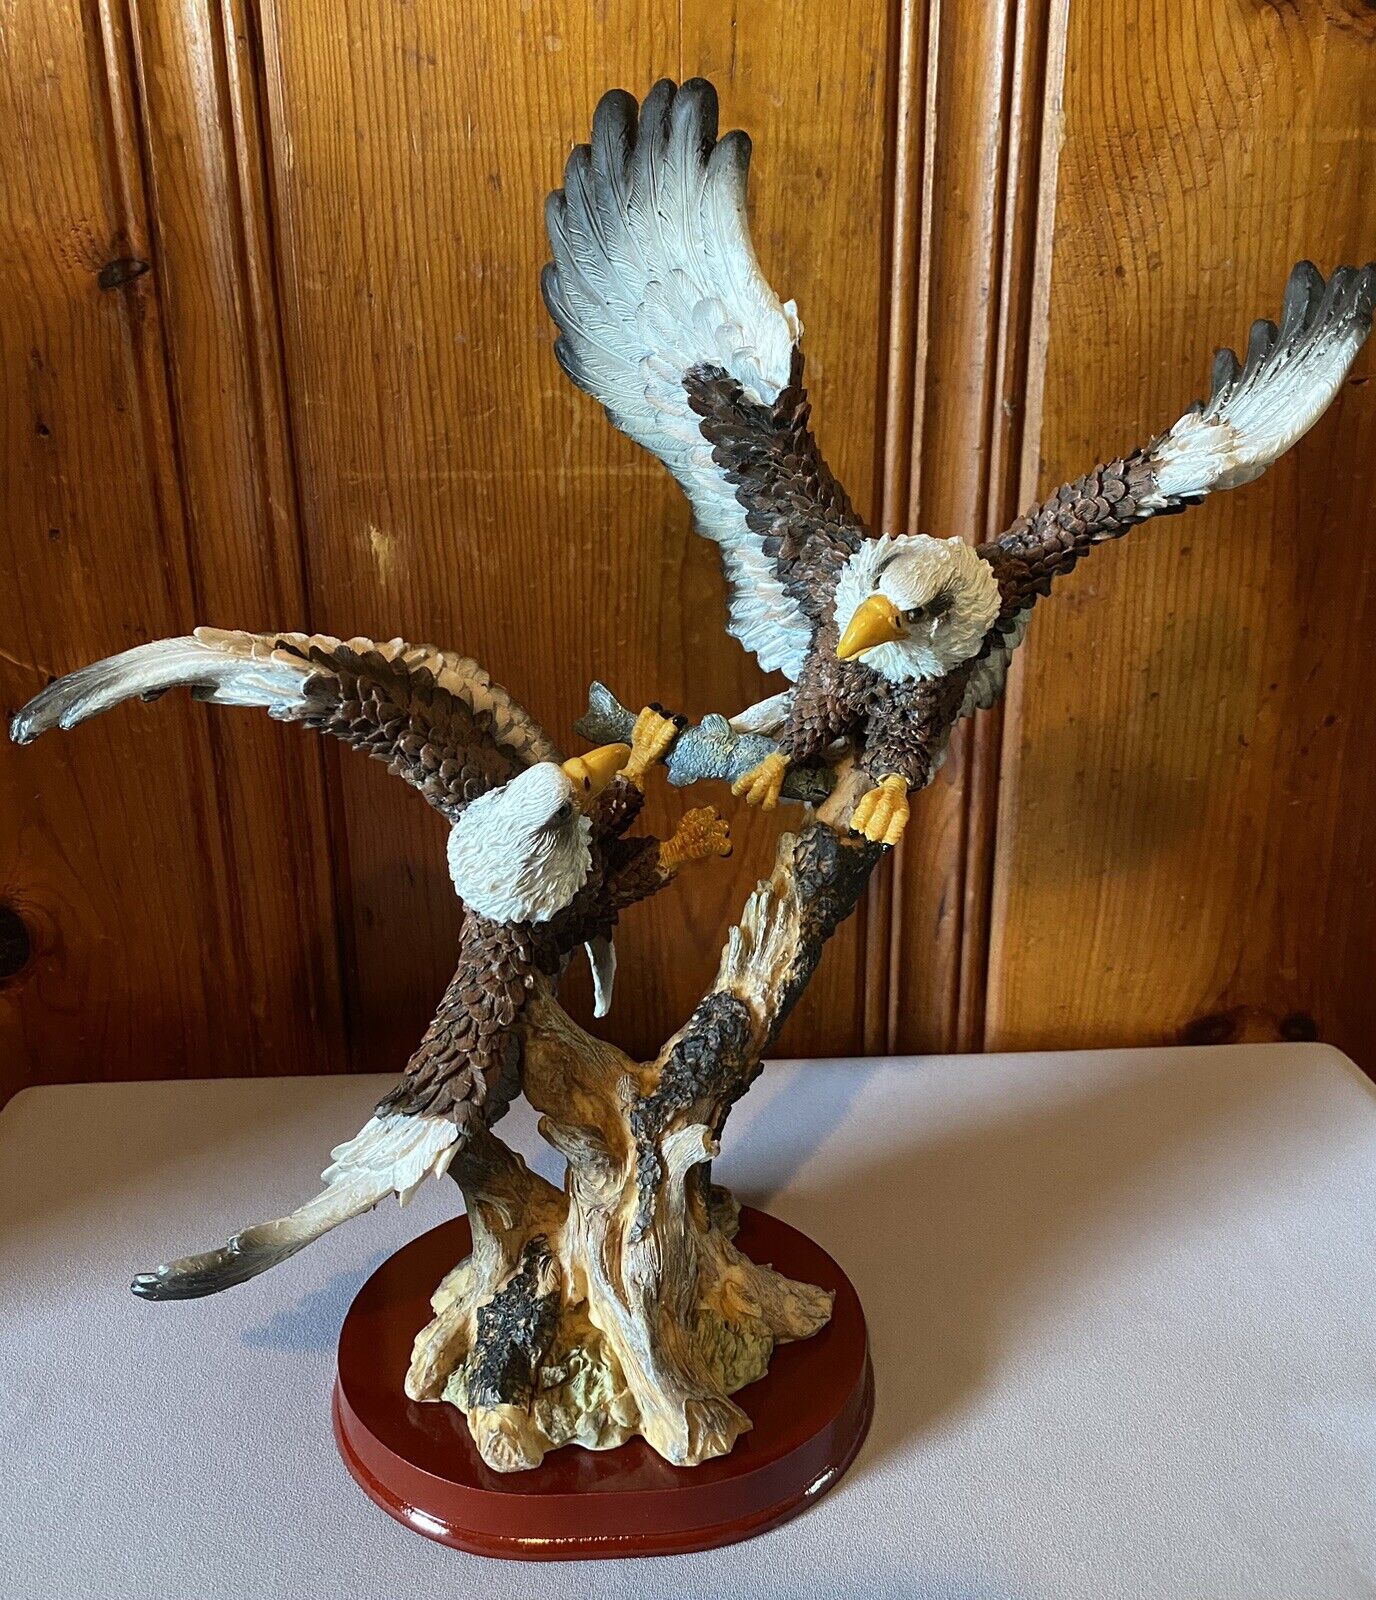 12” Double Eagle Fighting Over Fish Ceramic Figurine On Wooden Base